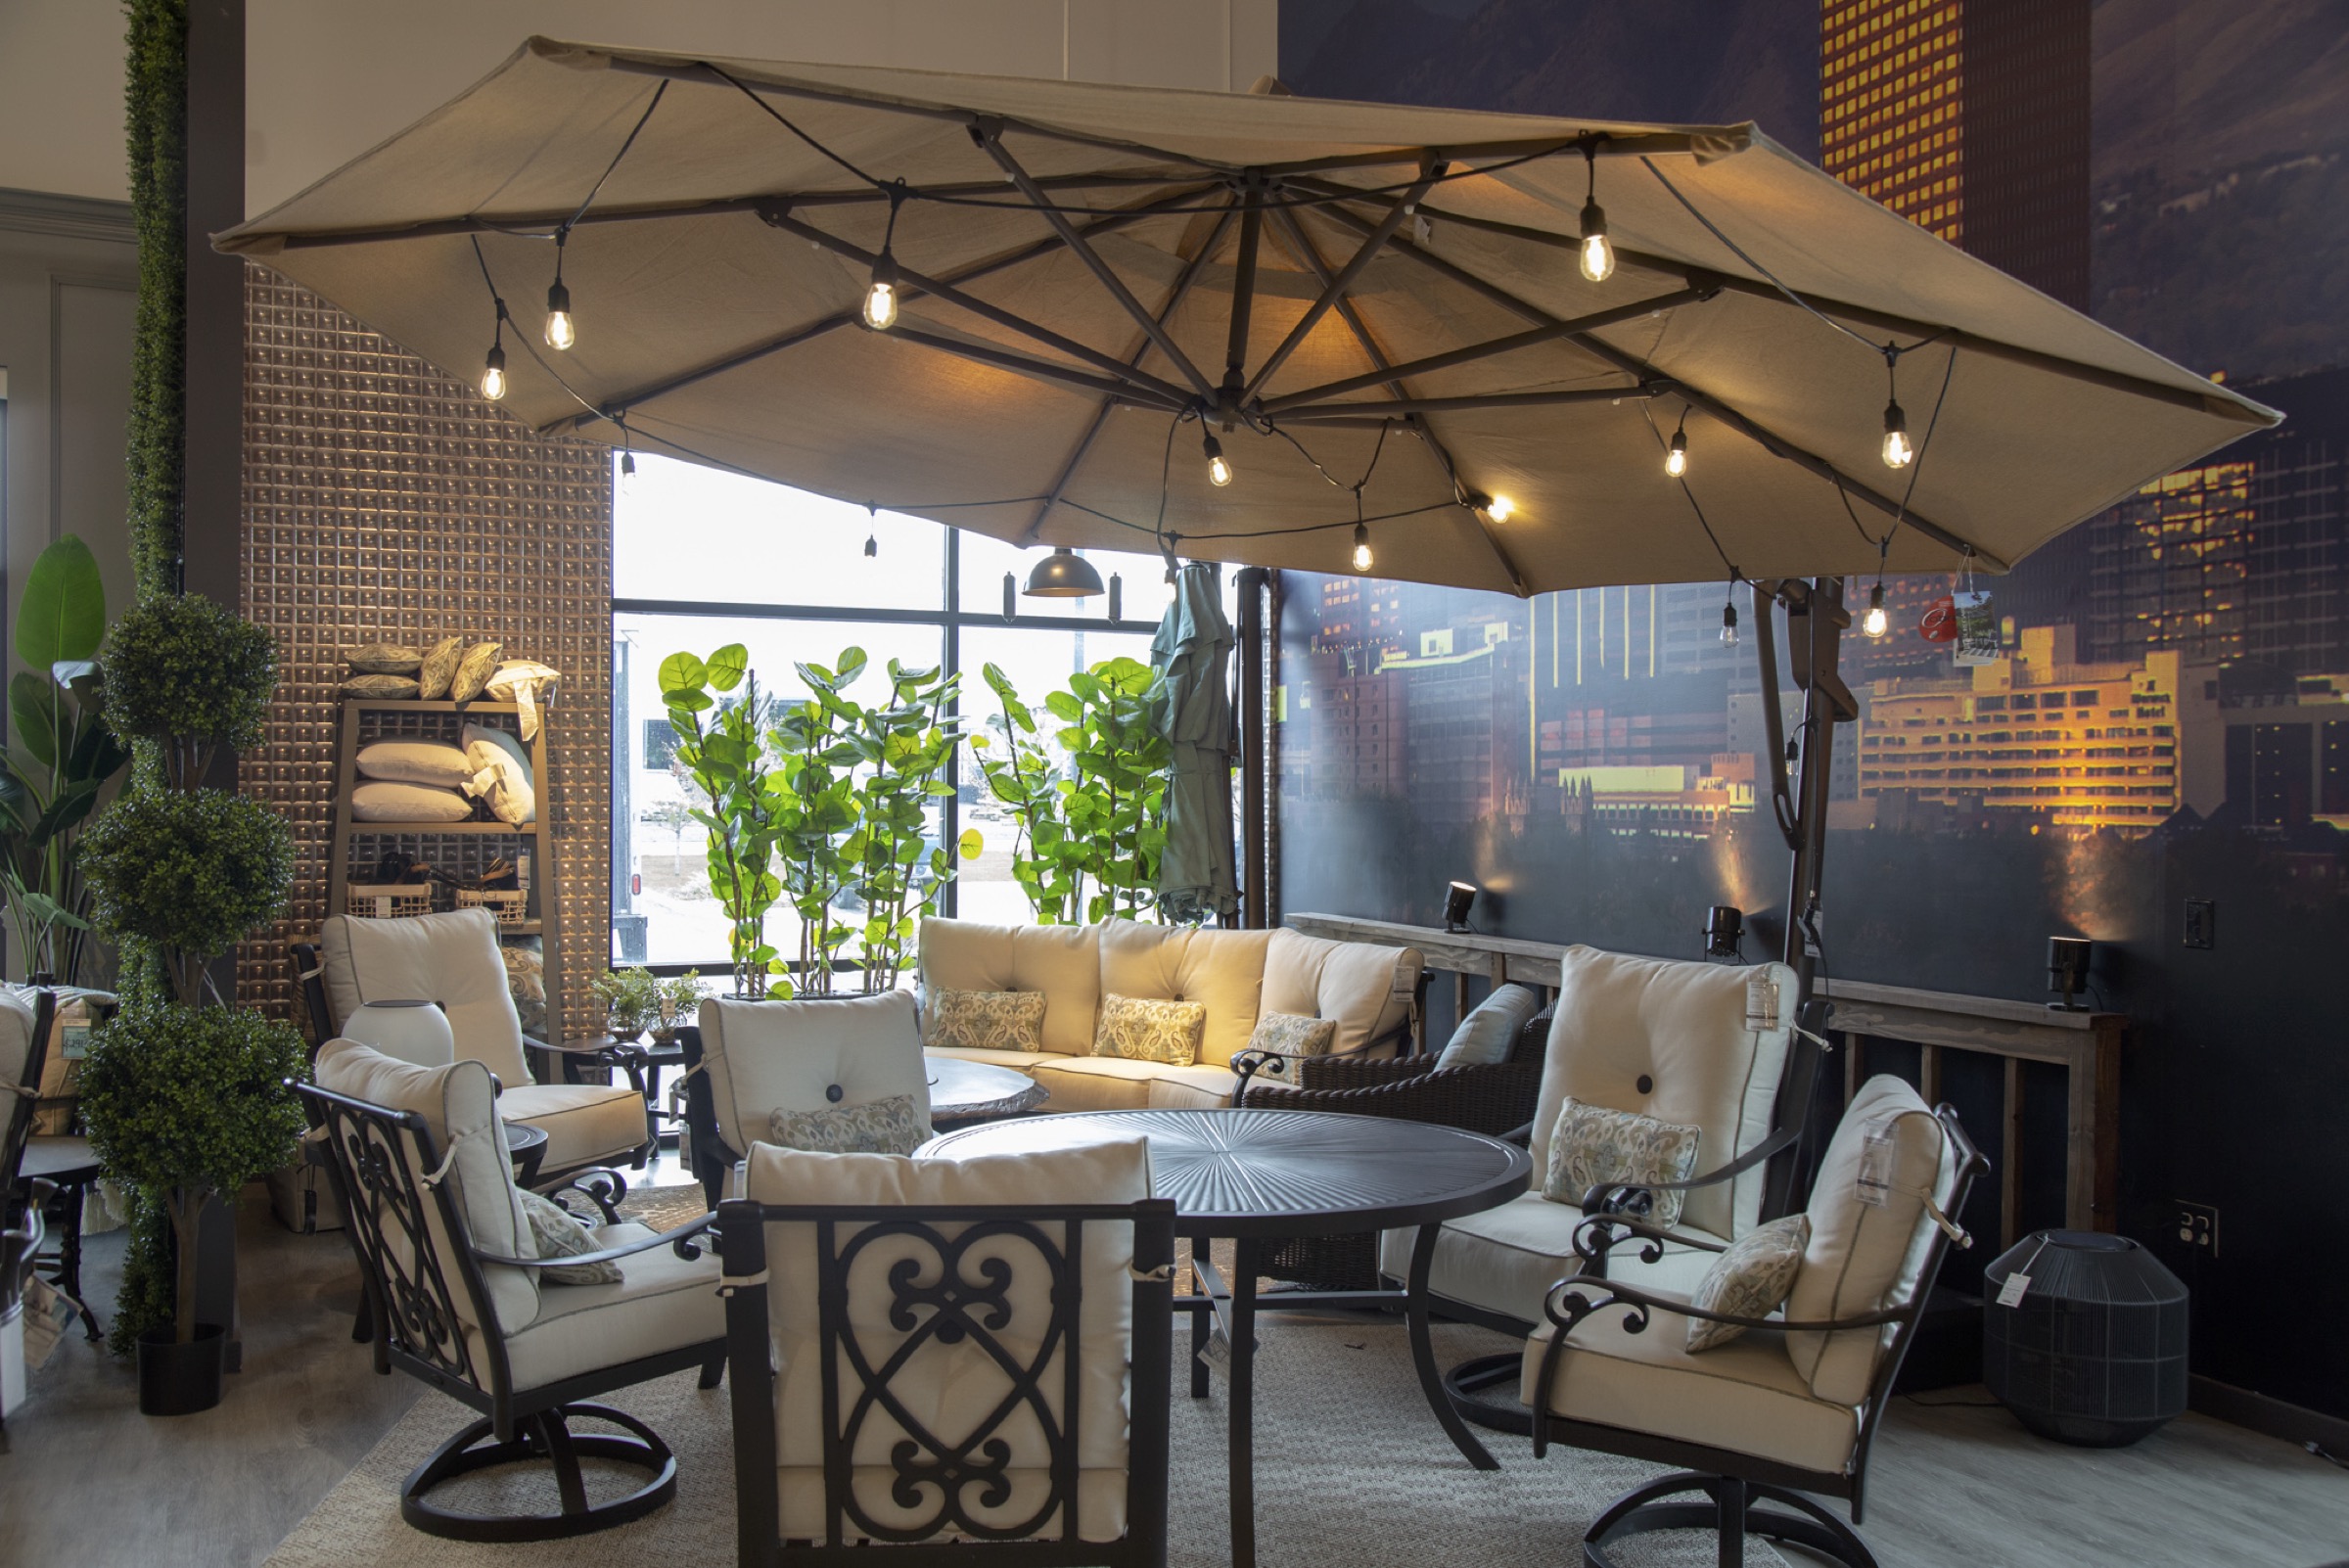 Patio Furniture Selection at the Showroom by Furniture Row